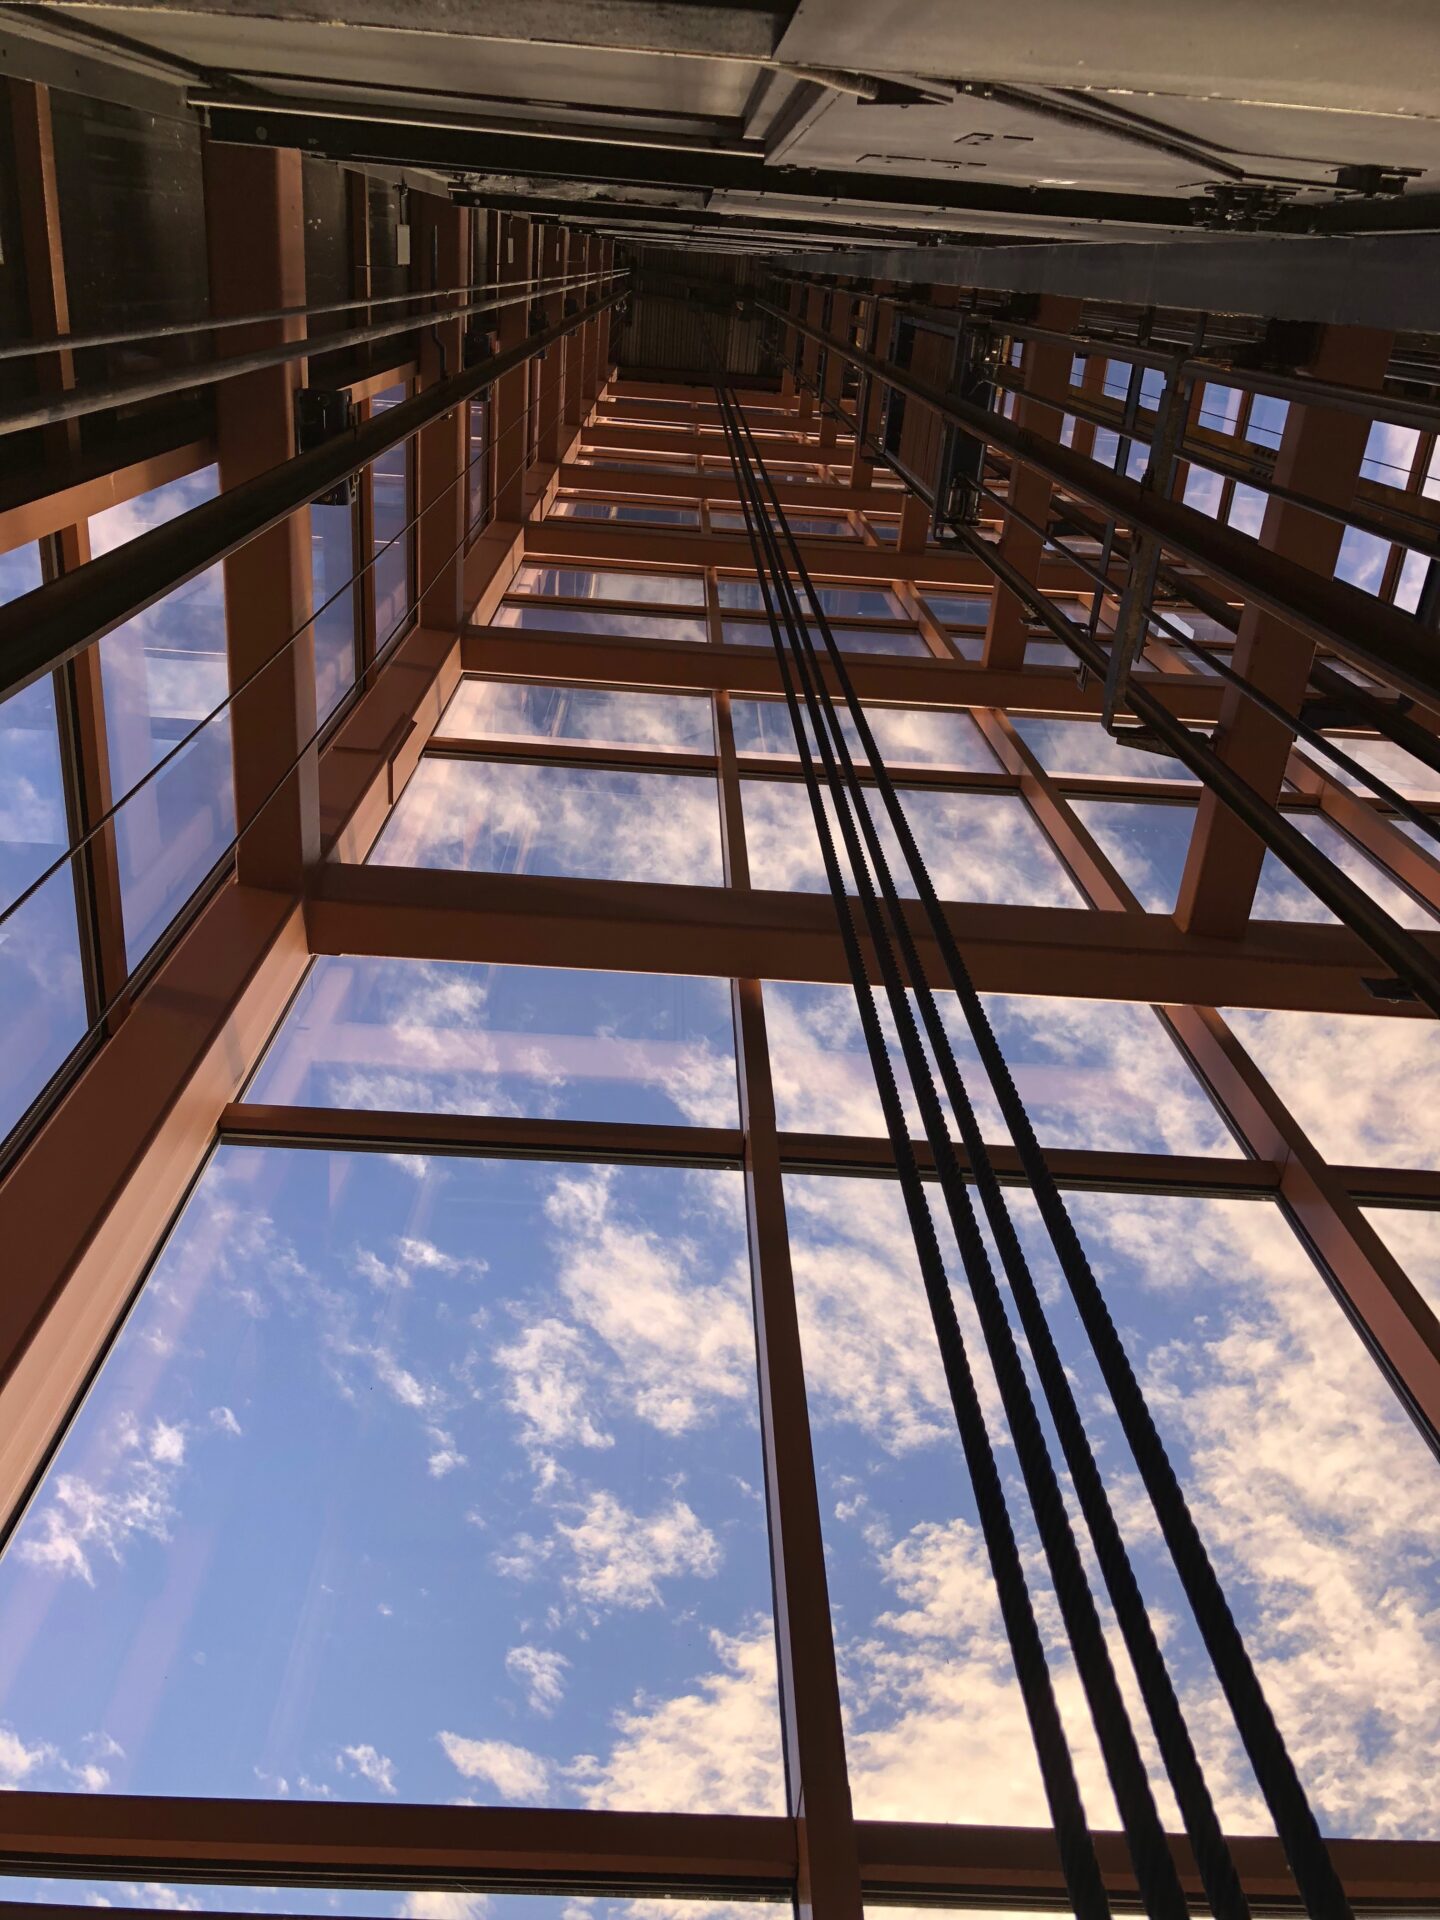 A view of the sky from inside a building.